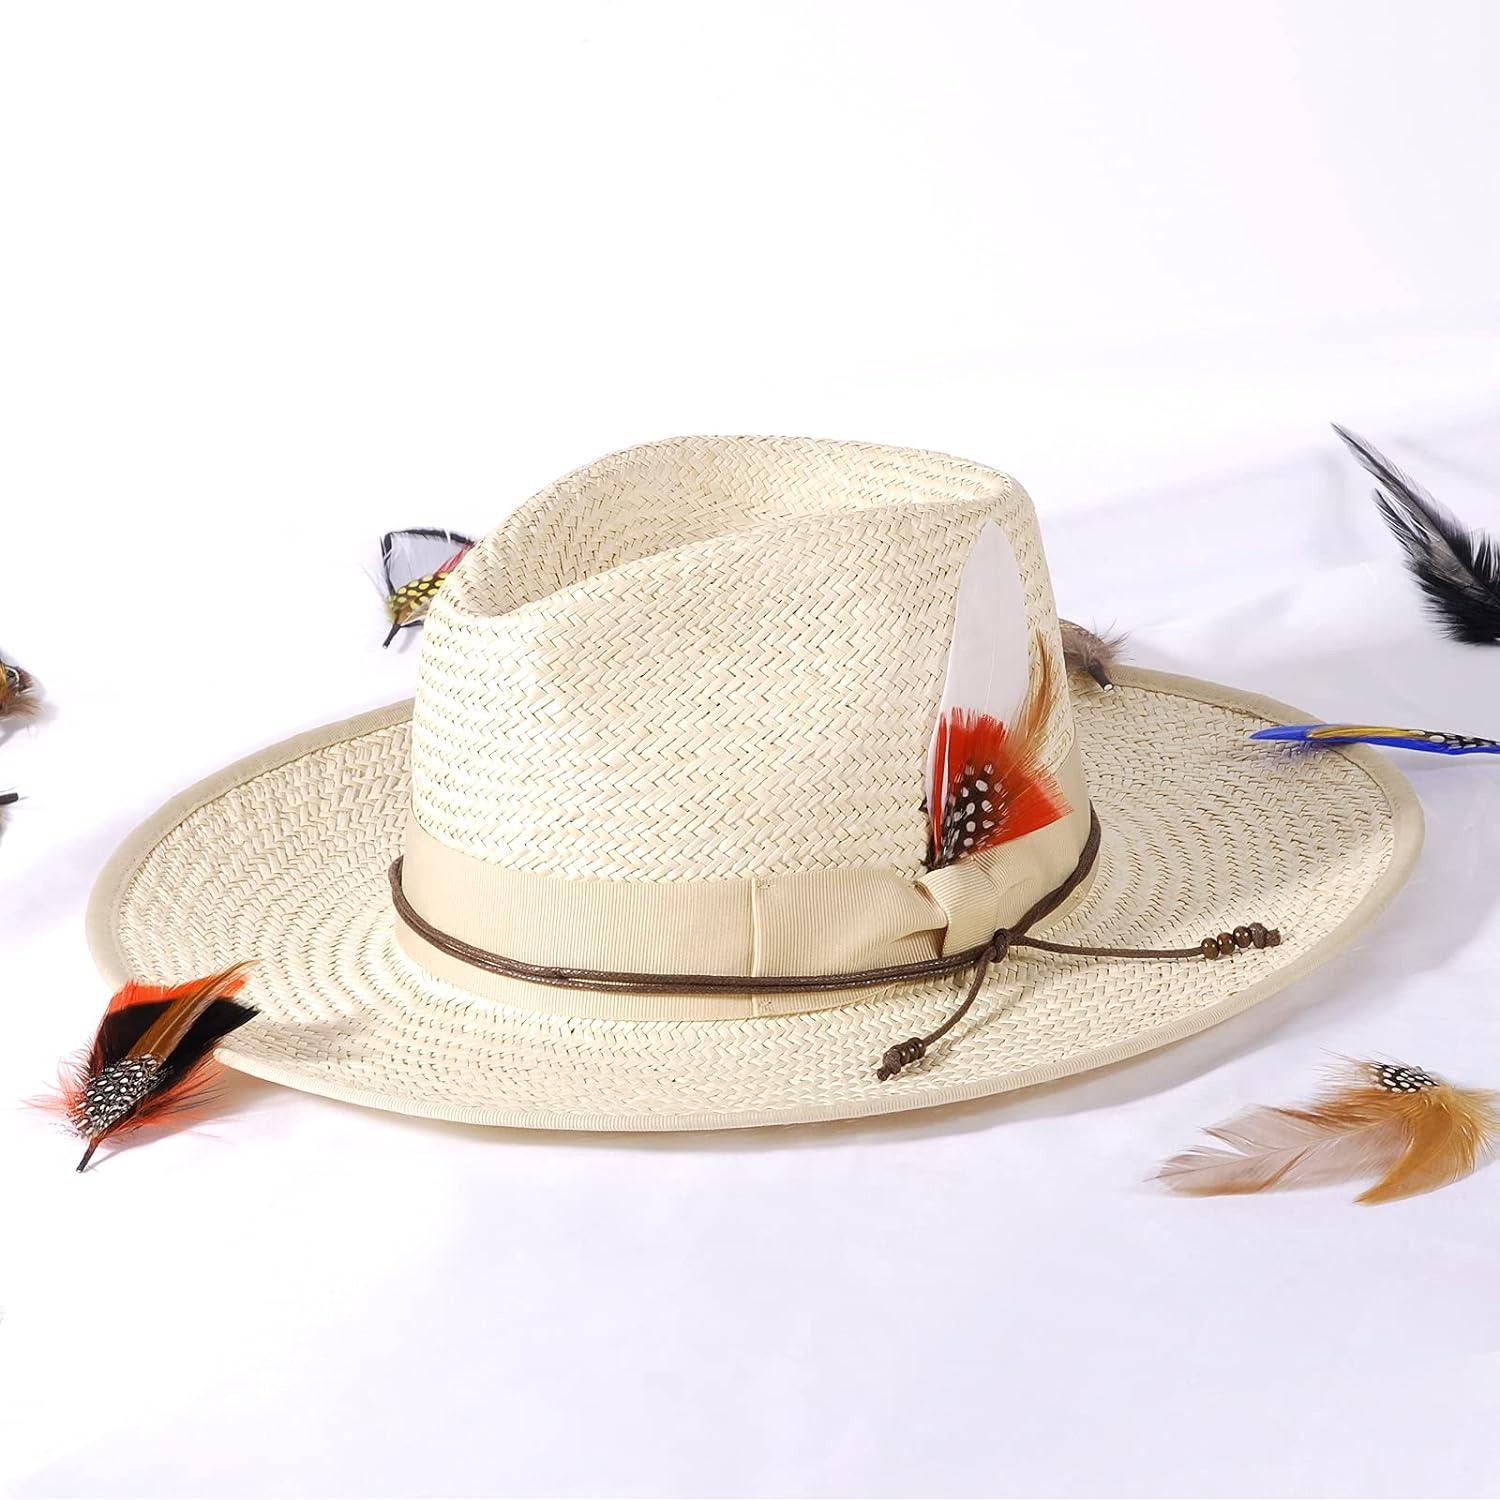 Hat Feathers, 10 Pcs Assorted Natural Feather Packs Accessories for Fedora,  Cowboy, Open Road, Borges, Scott, Trilby Hats (9 Pcs-3)